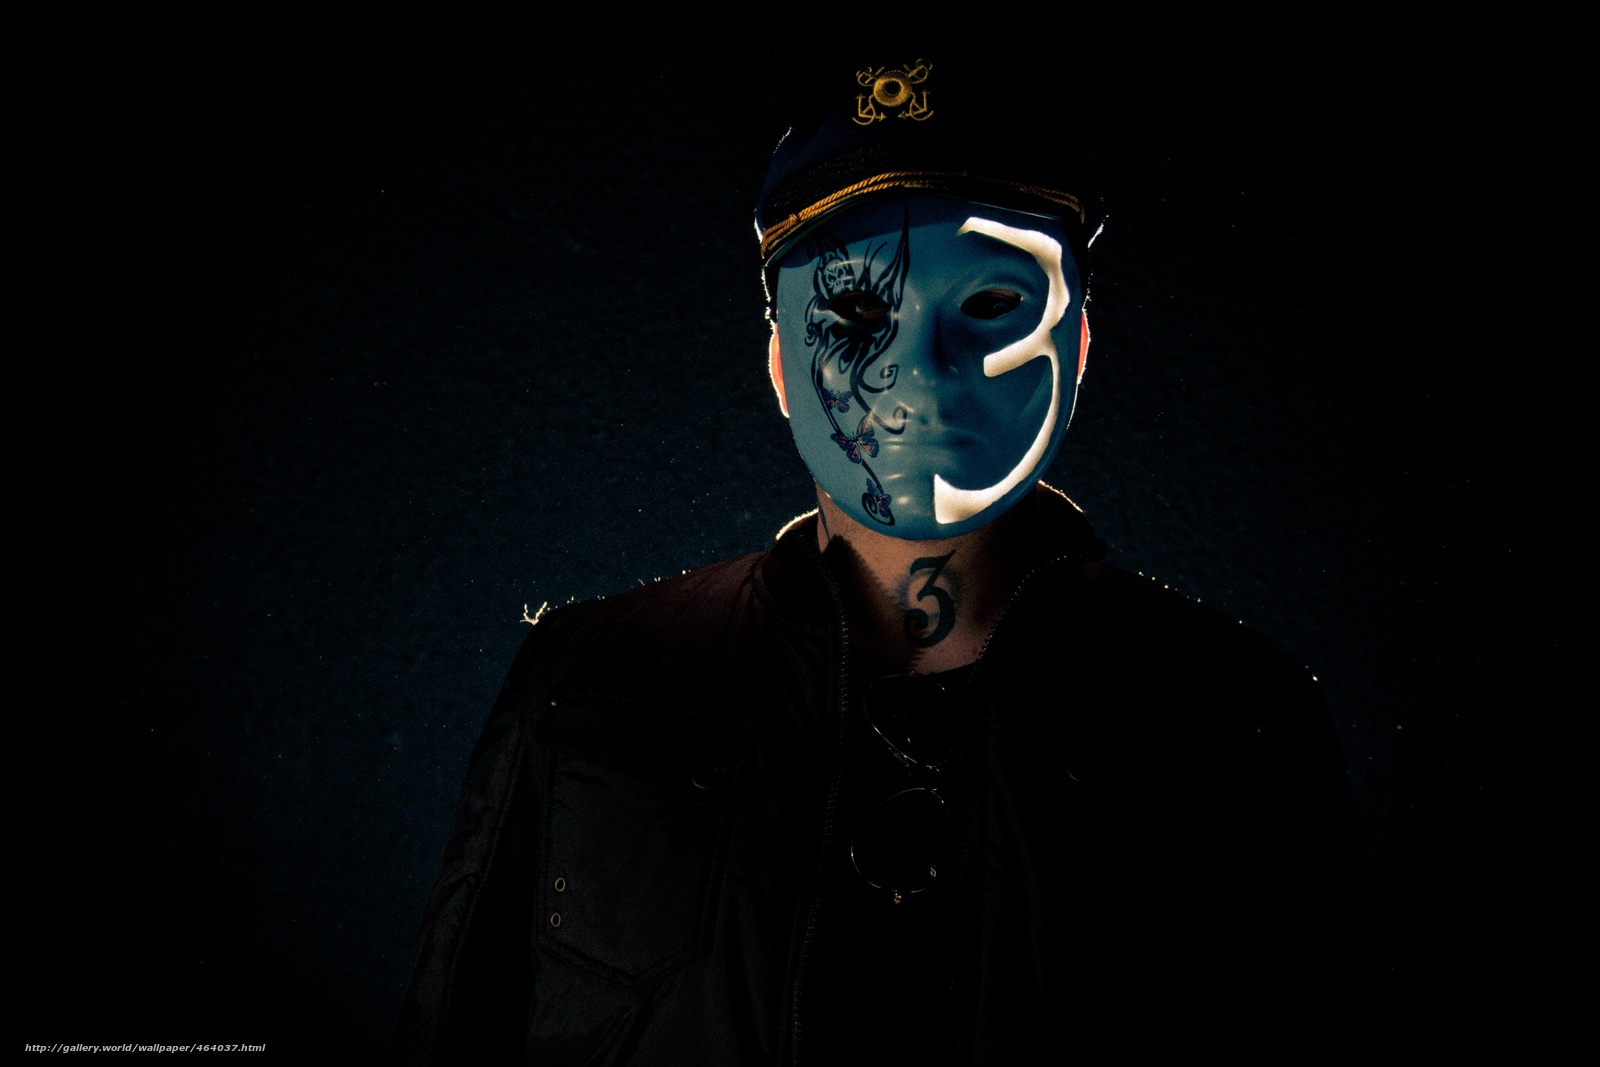 Download wallpaper mask man hollywood undead johnny 3 tears 1600x1067